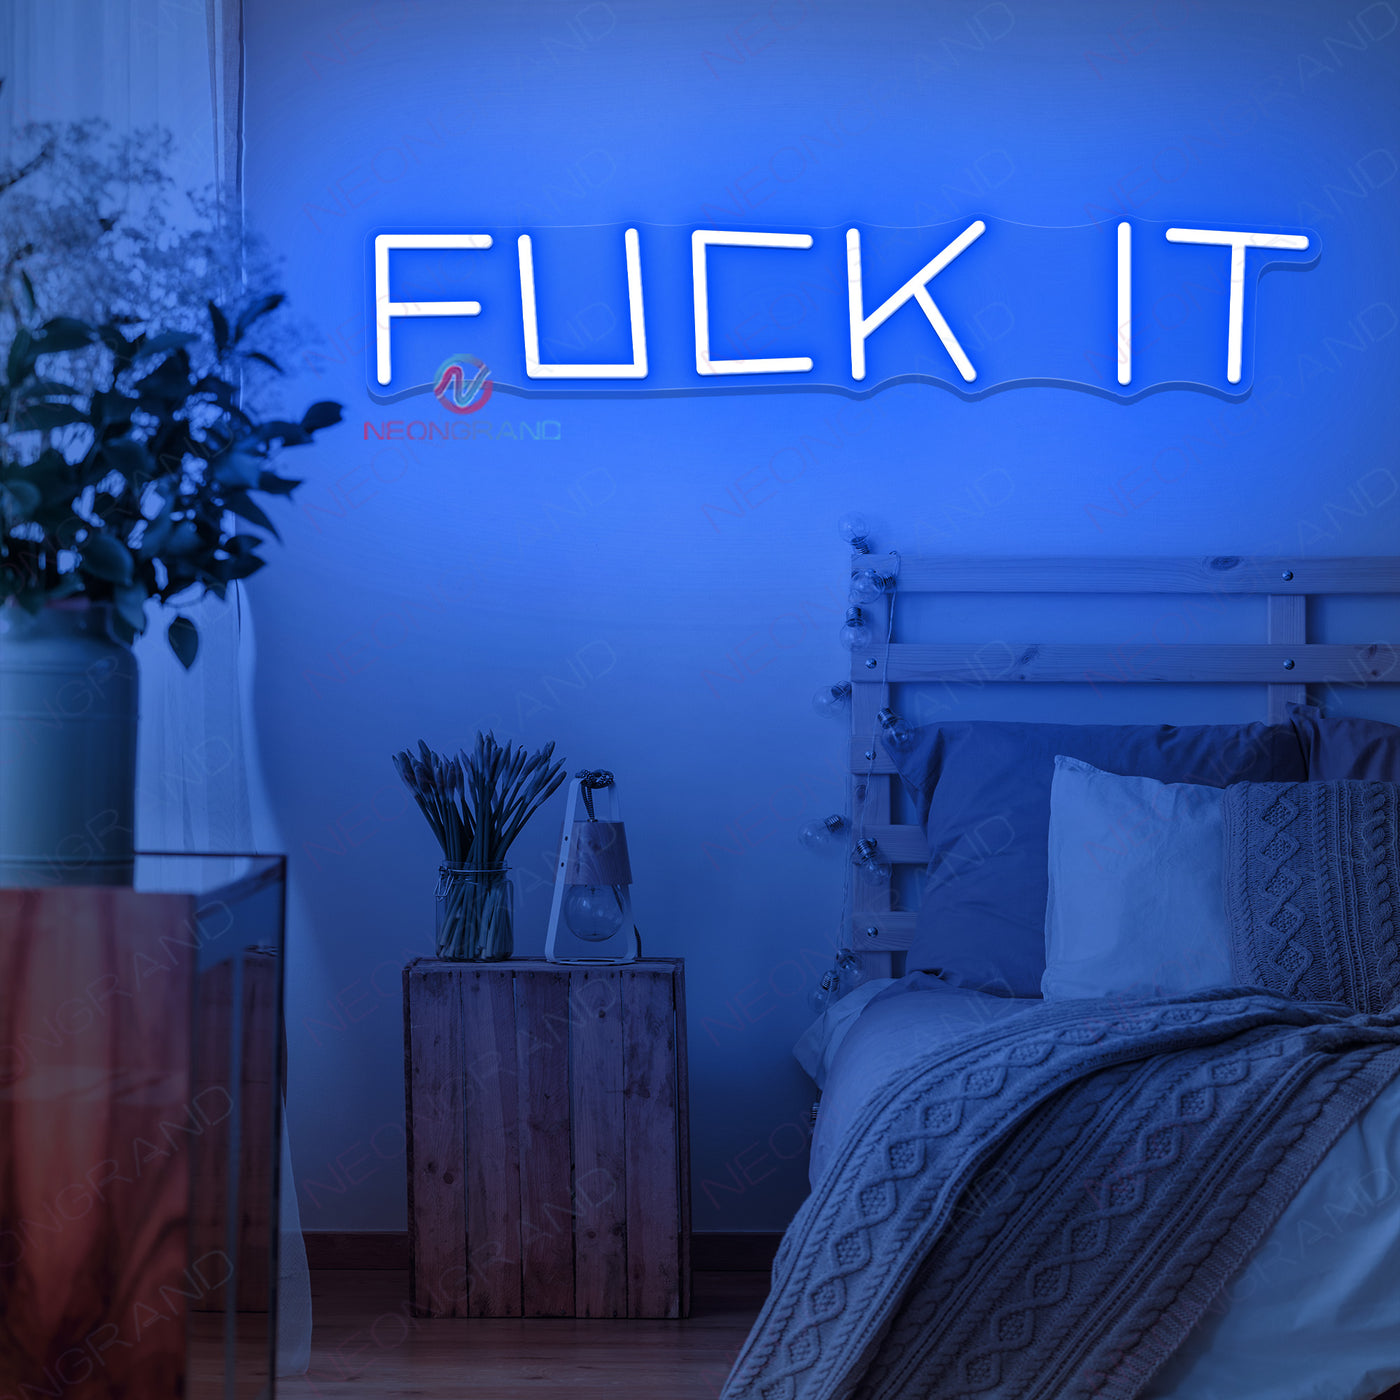 Fuck It Neon Sign Led Light Man Cave Neon Signs blue